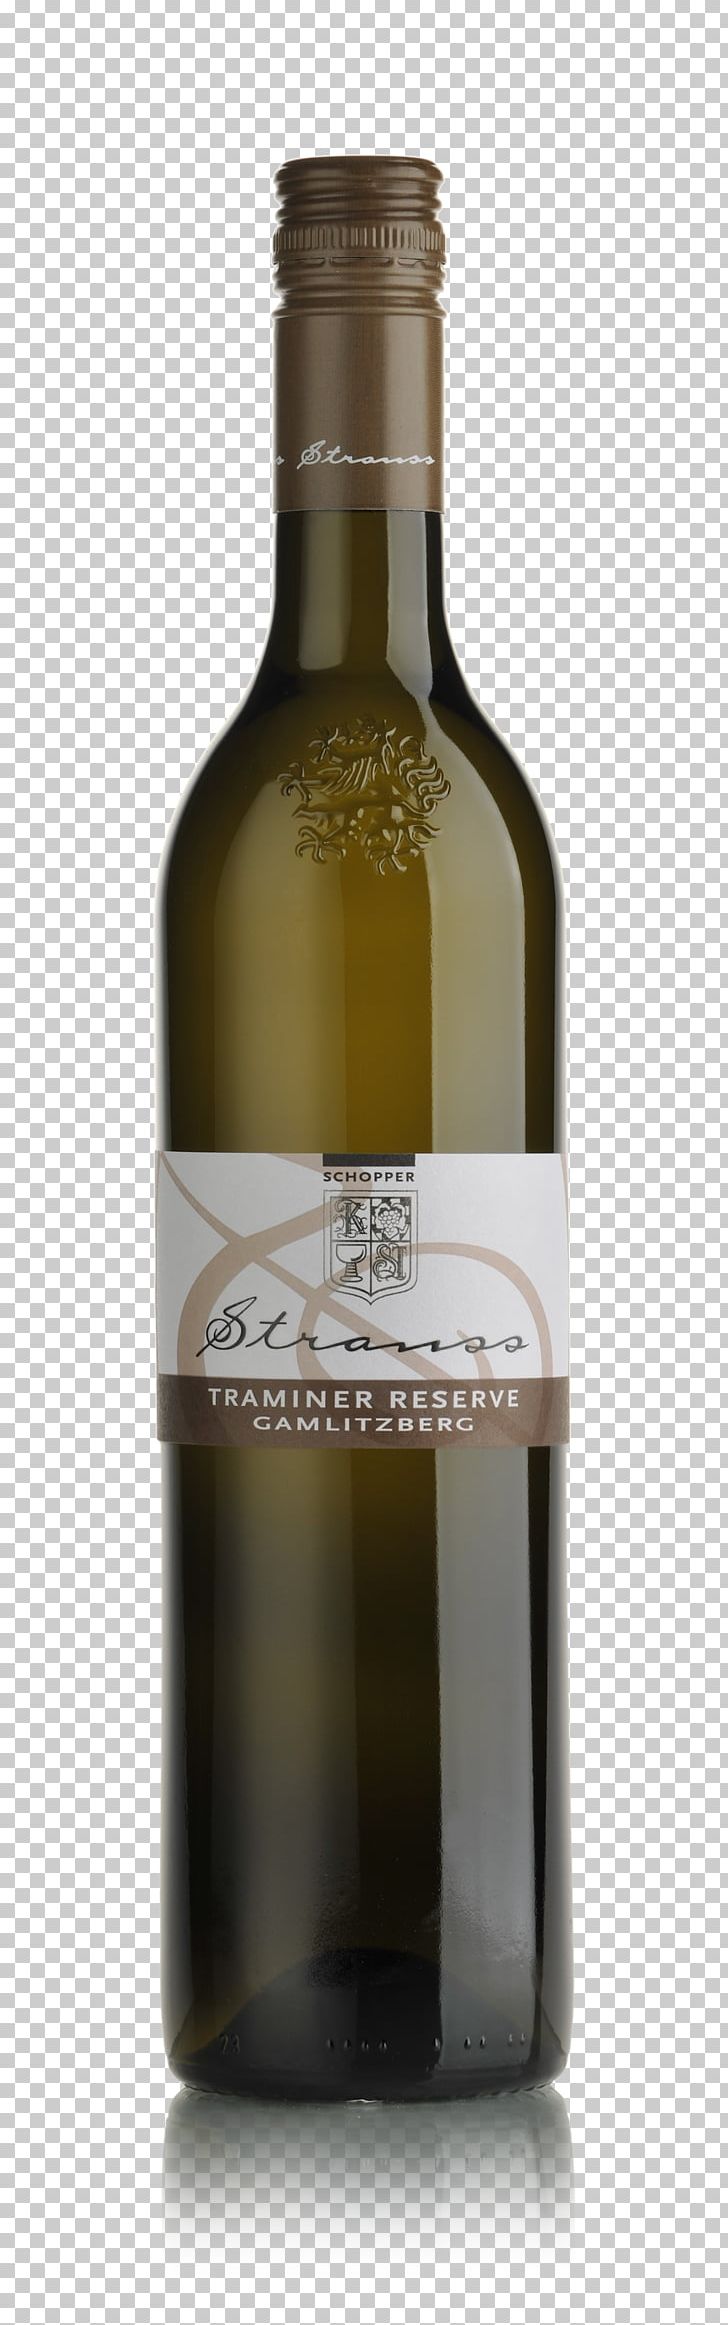 White Wine Sauvignon Blanc Pinot Gris Gewürztraminer PNG, Clipart, Alcoholic Beverage, Bottle, Chardonnay, Drink, Food Drinks Free PNG Download